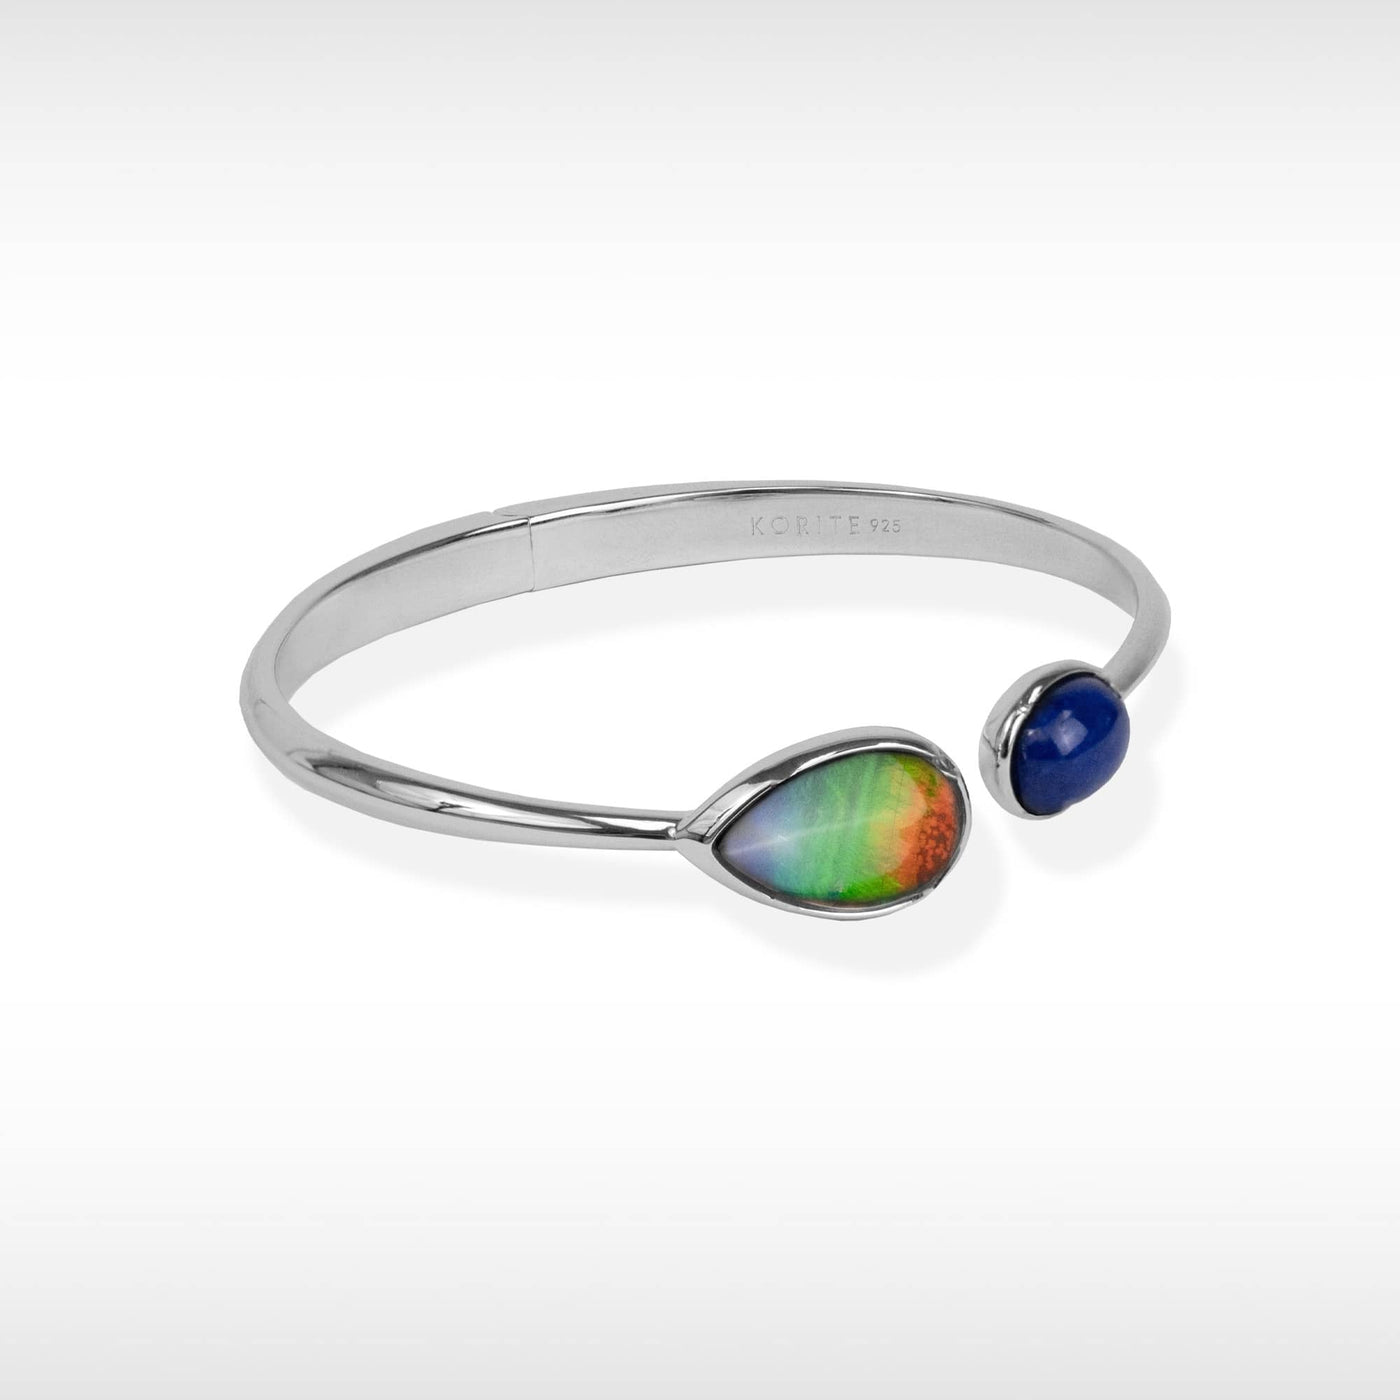 Harmony Ammolite Bangle in Sterling Silver with Lapis